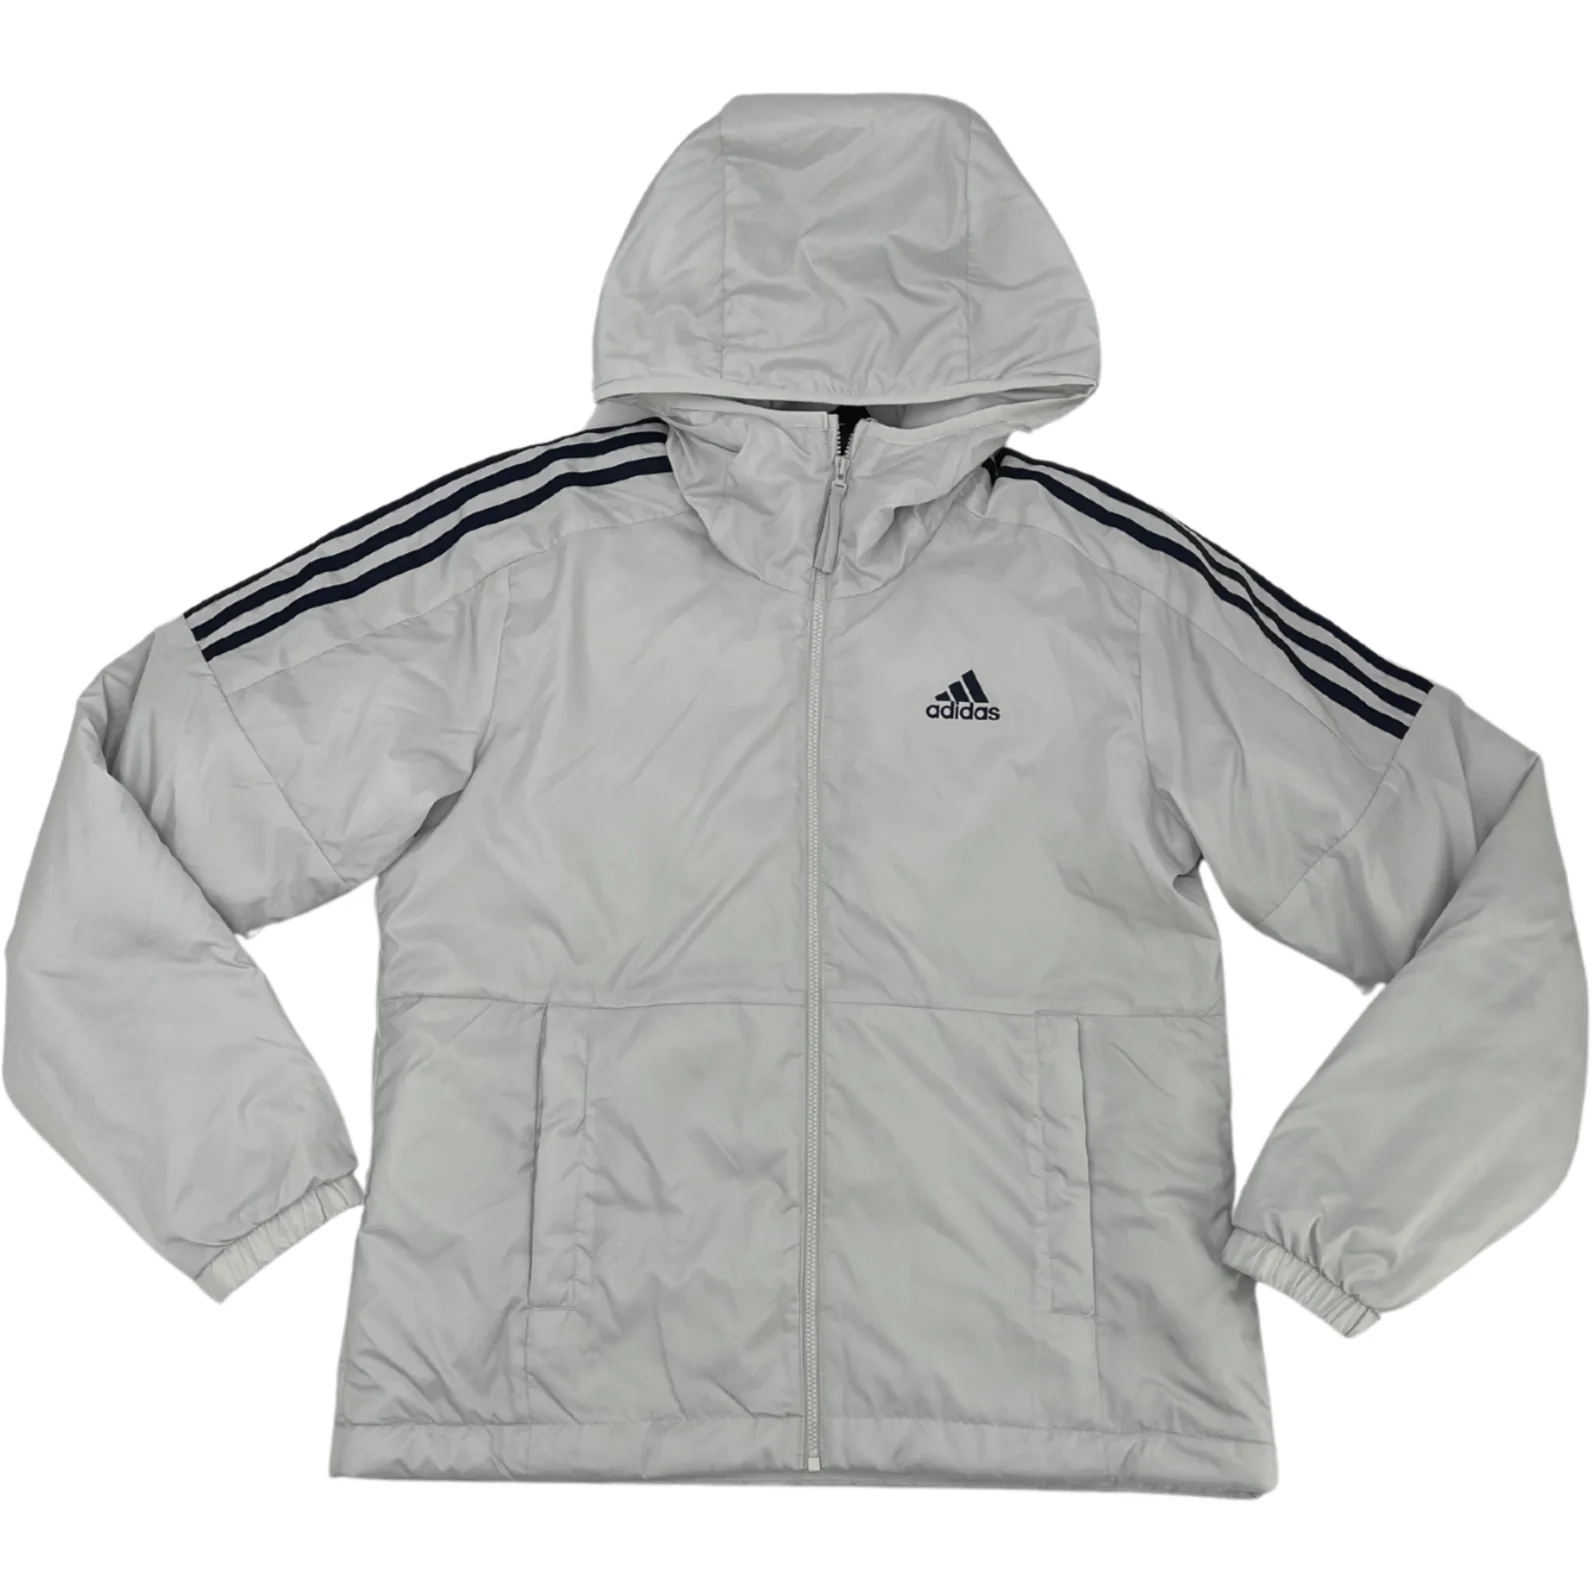 Adidas Women's Jacket / Off-White with Navy / Fall Jacket / Size S